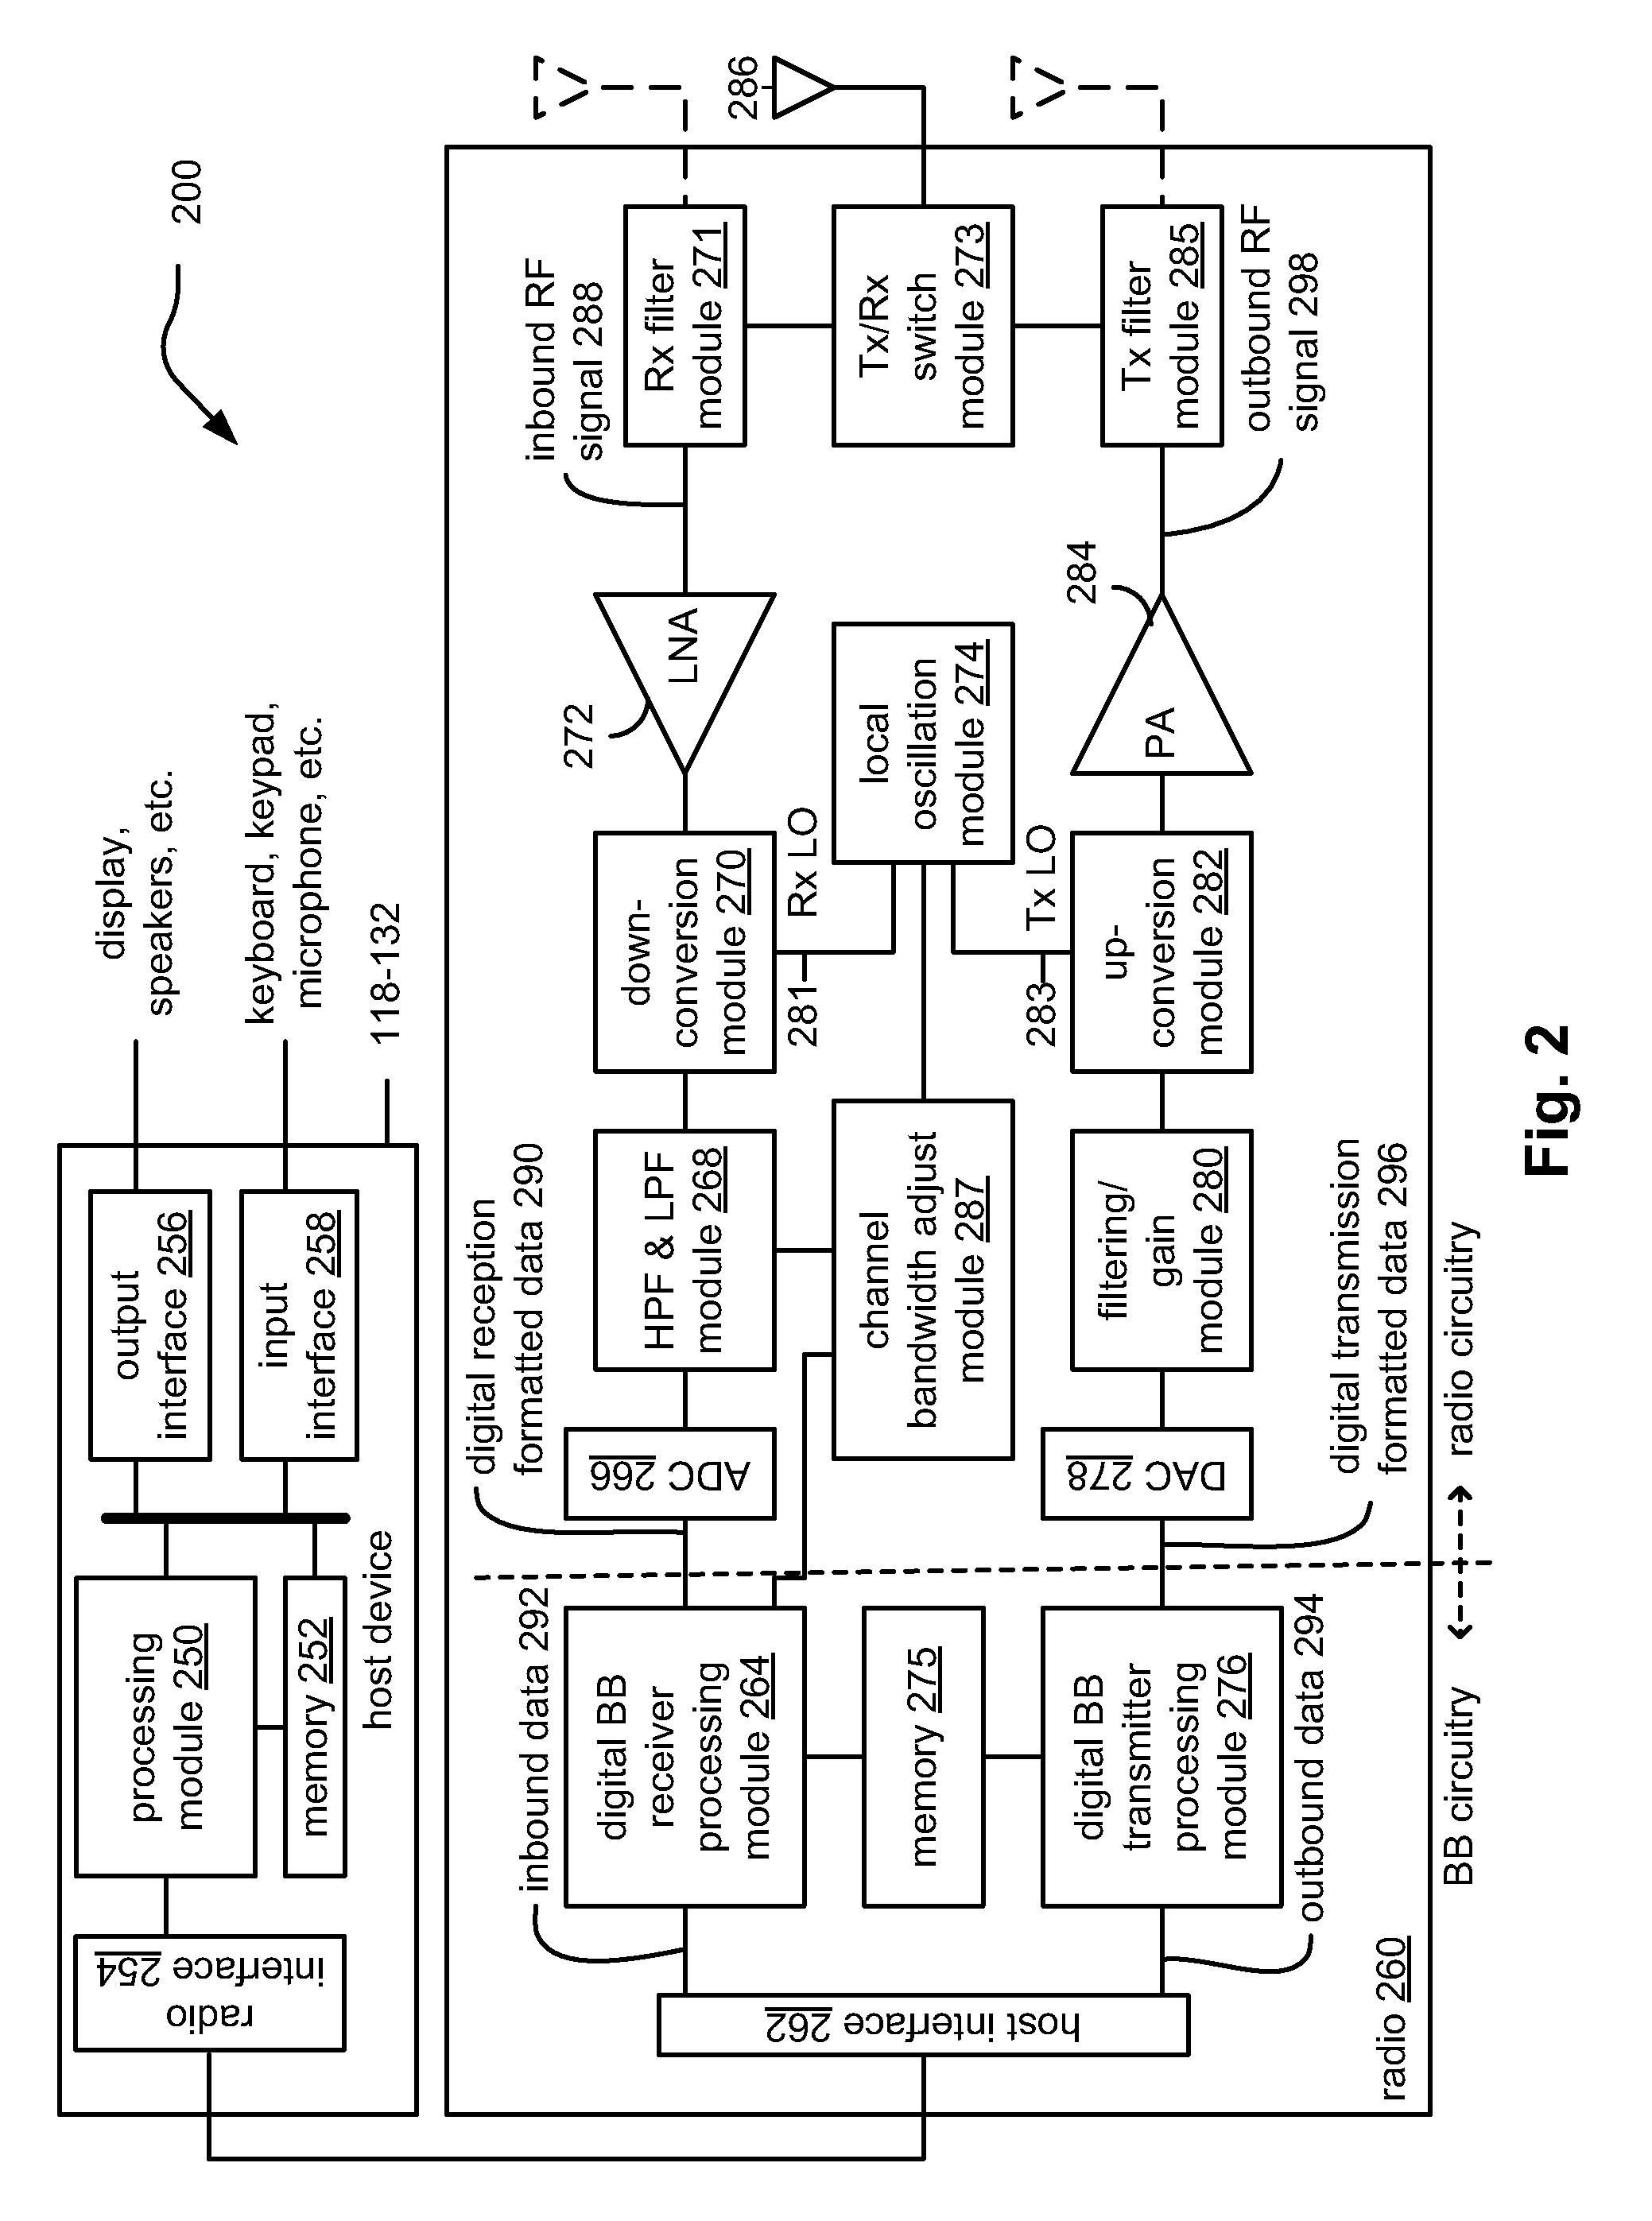 Direct detection of wireless interferers in a communication device for multiple modulation types